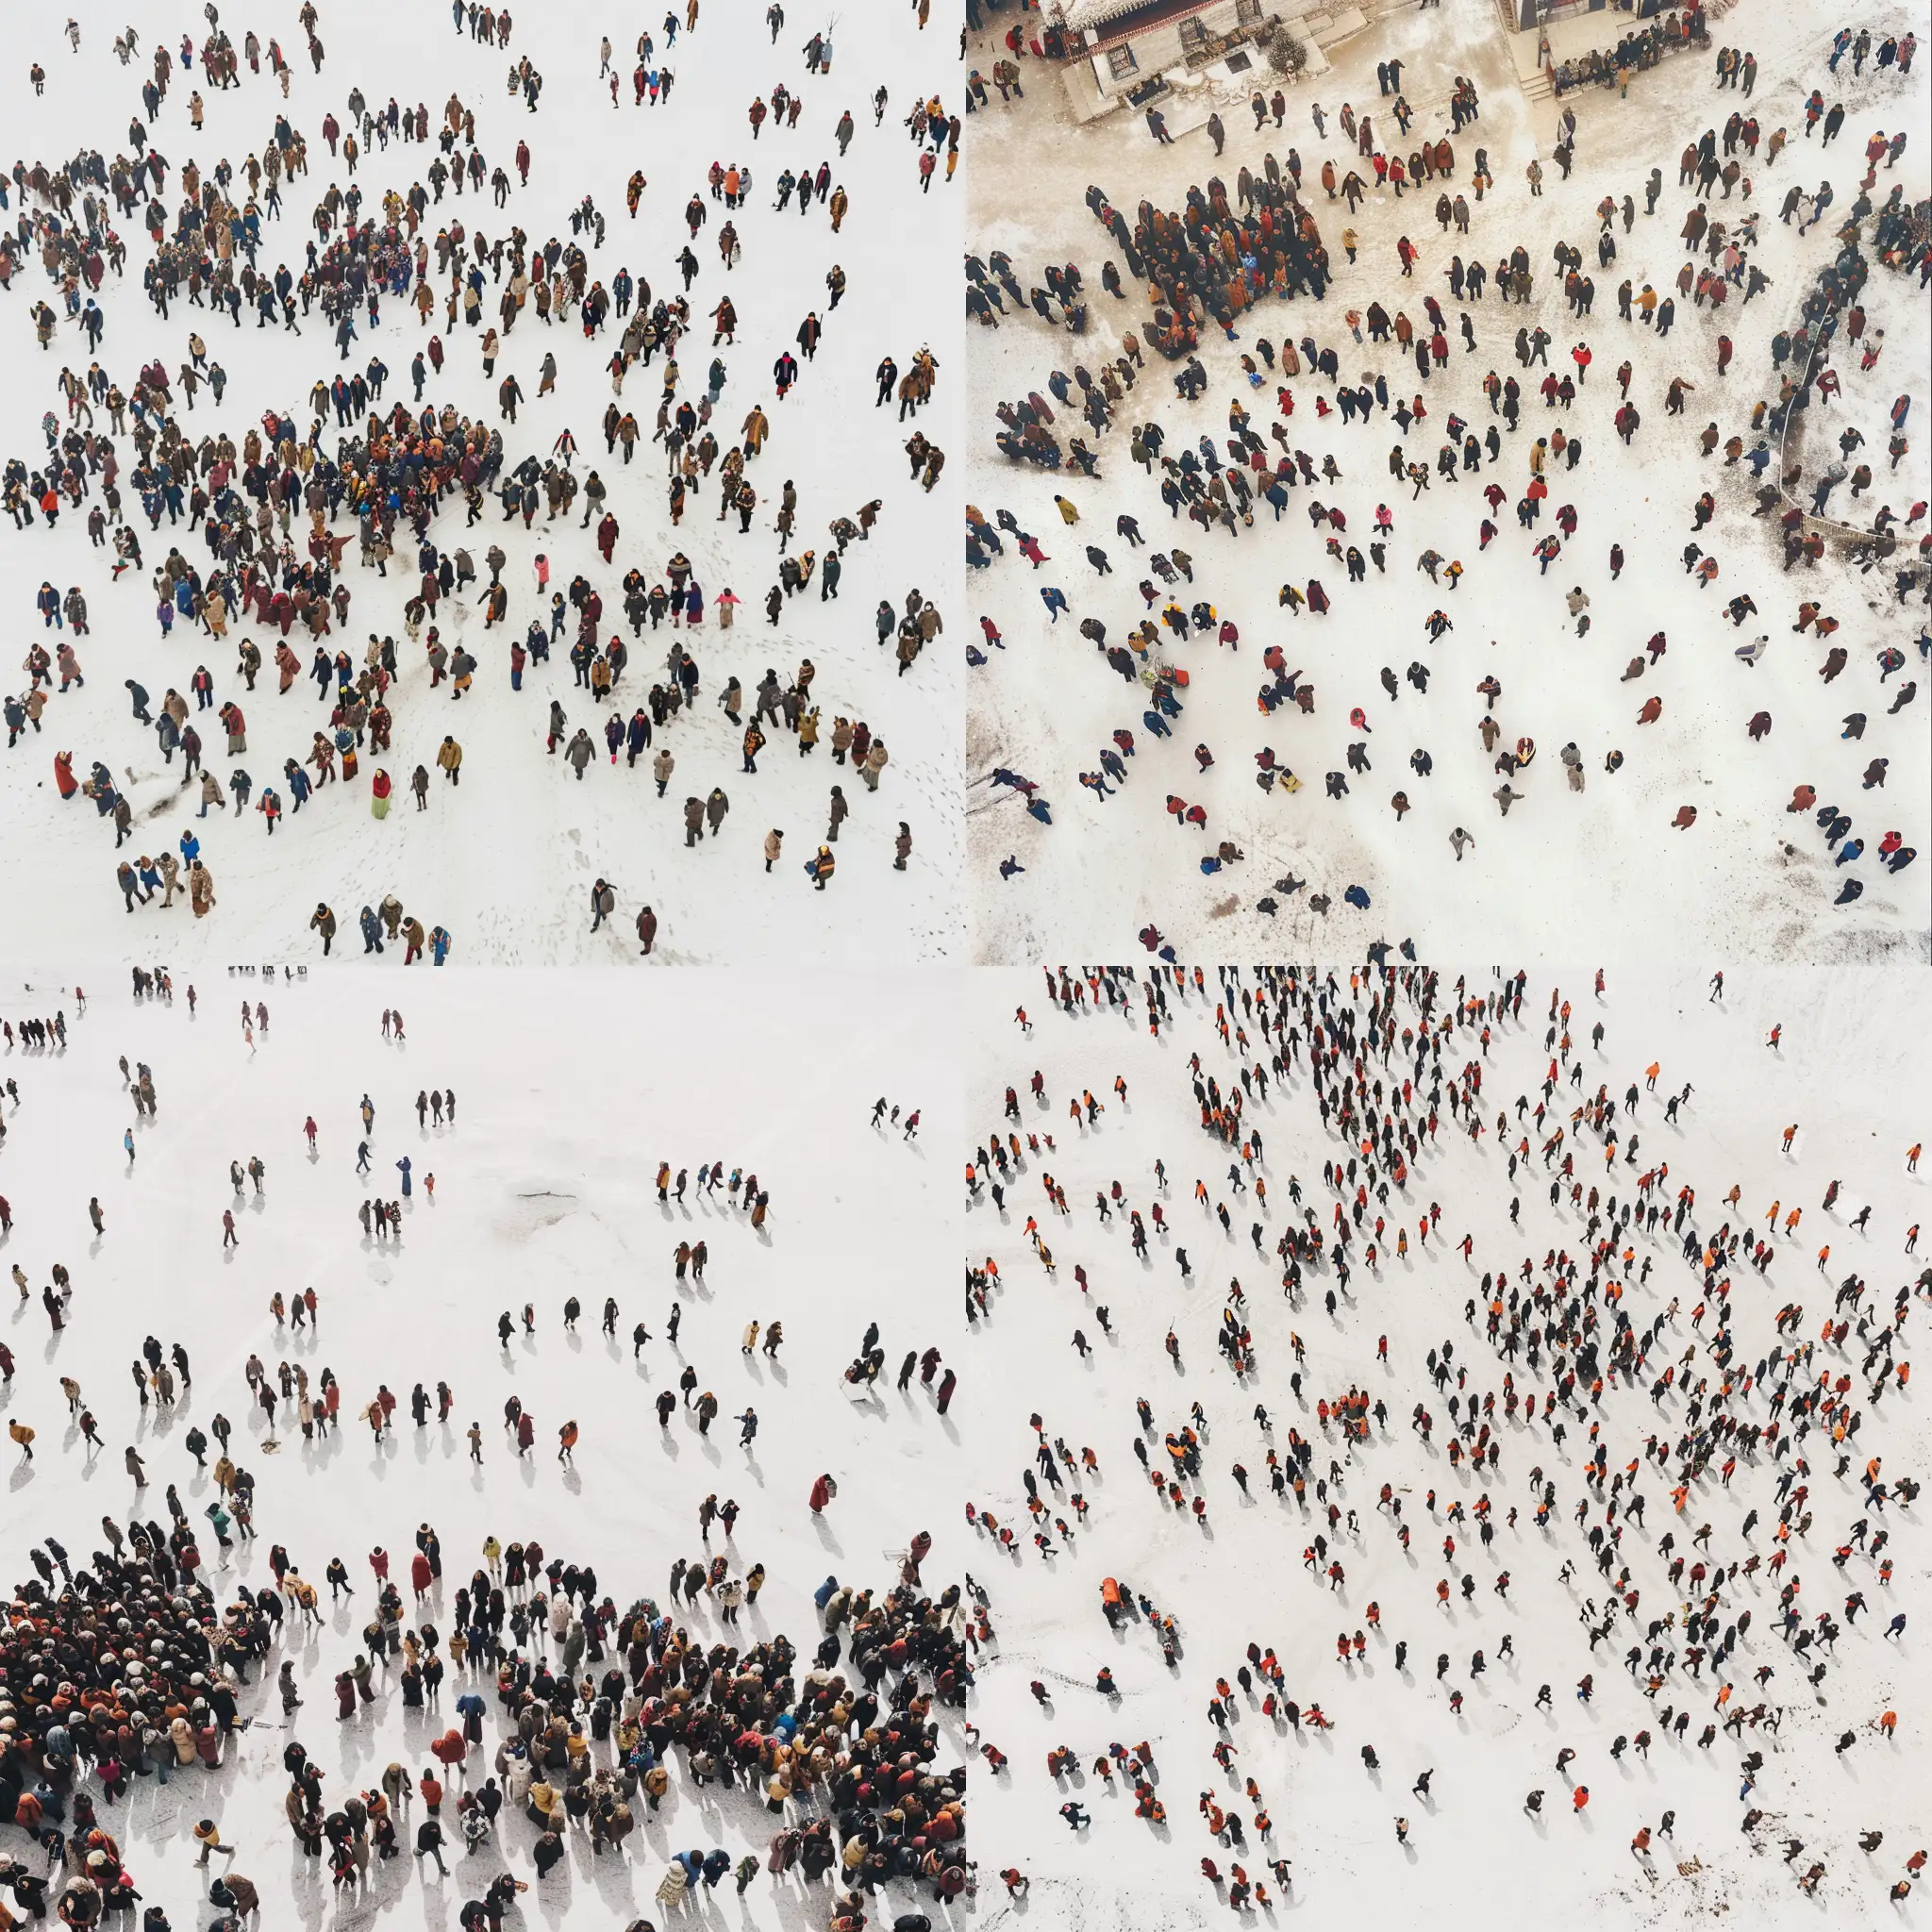 Tibetan-Style-Gathering-on-White-Ground-Crowded-Scene-from-a-Birds-Eye-View